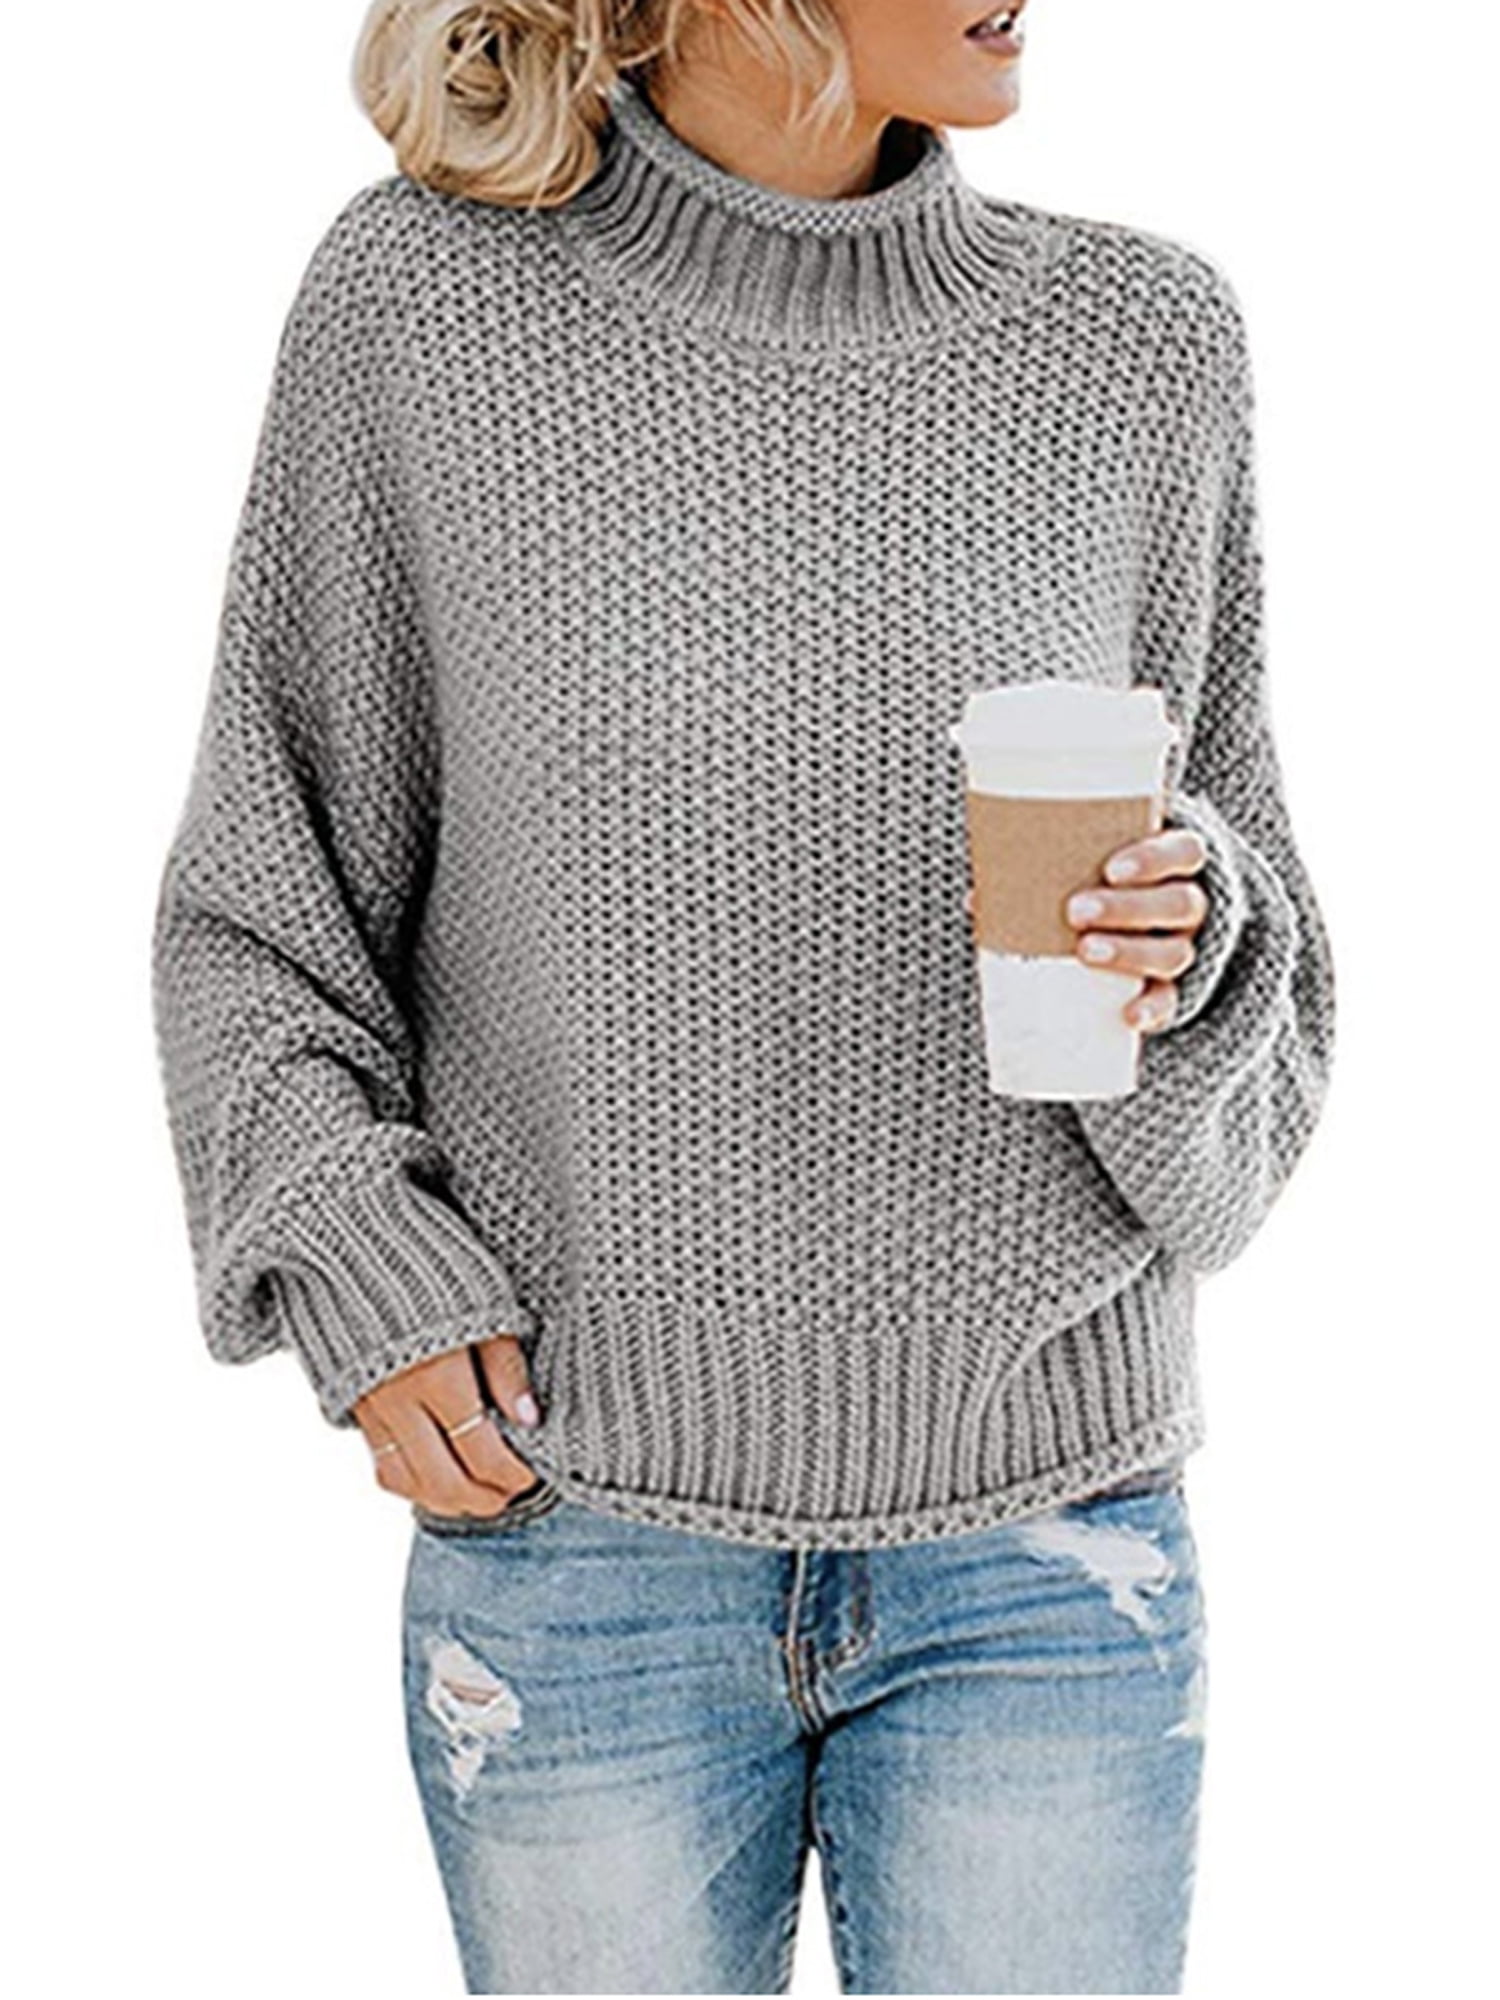 Womens Short Turtleneck Knitting Sweater Loose Long Sleeve Outwear Pullover Tops 